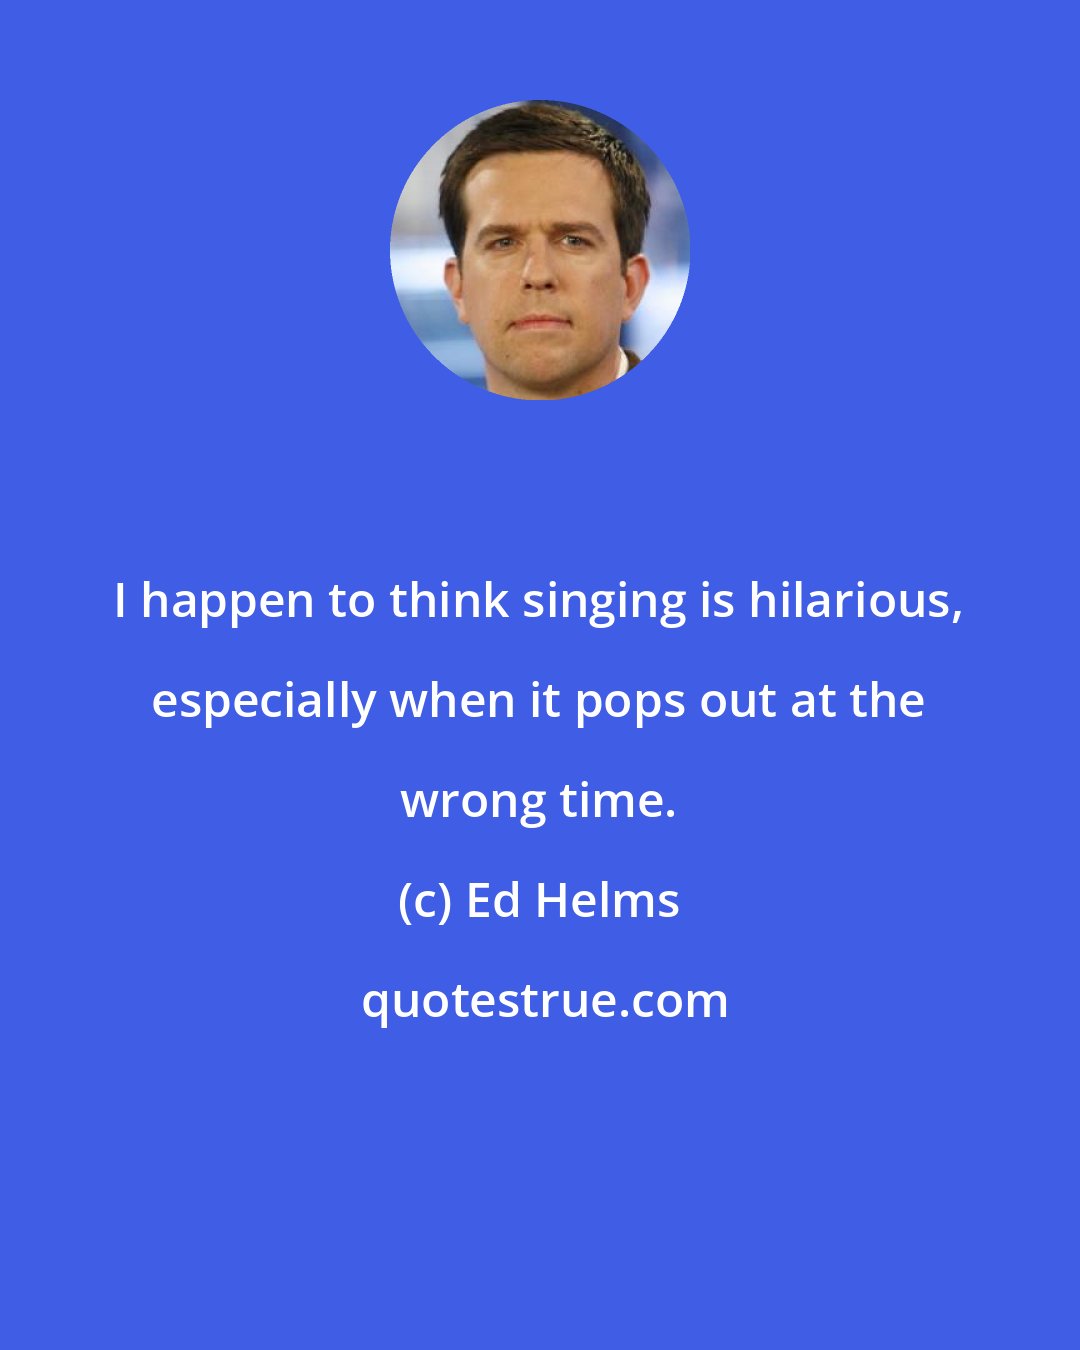 Ed Helms: I happen to think singing is hilarious, especially when it pops out at the wrong time.